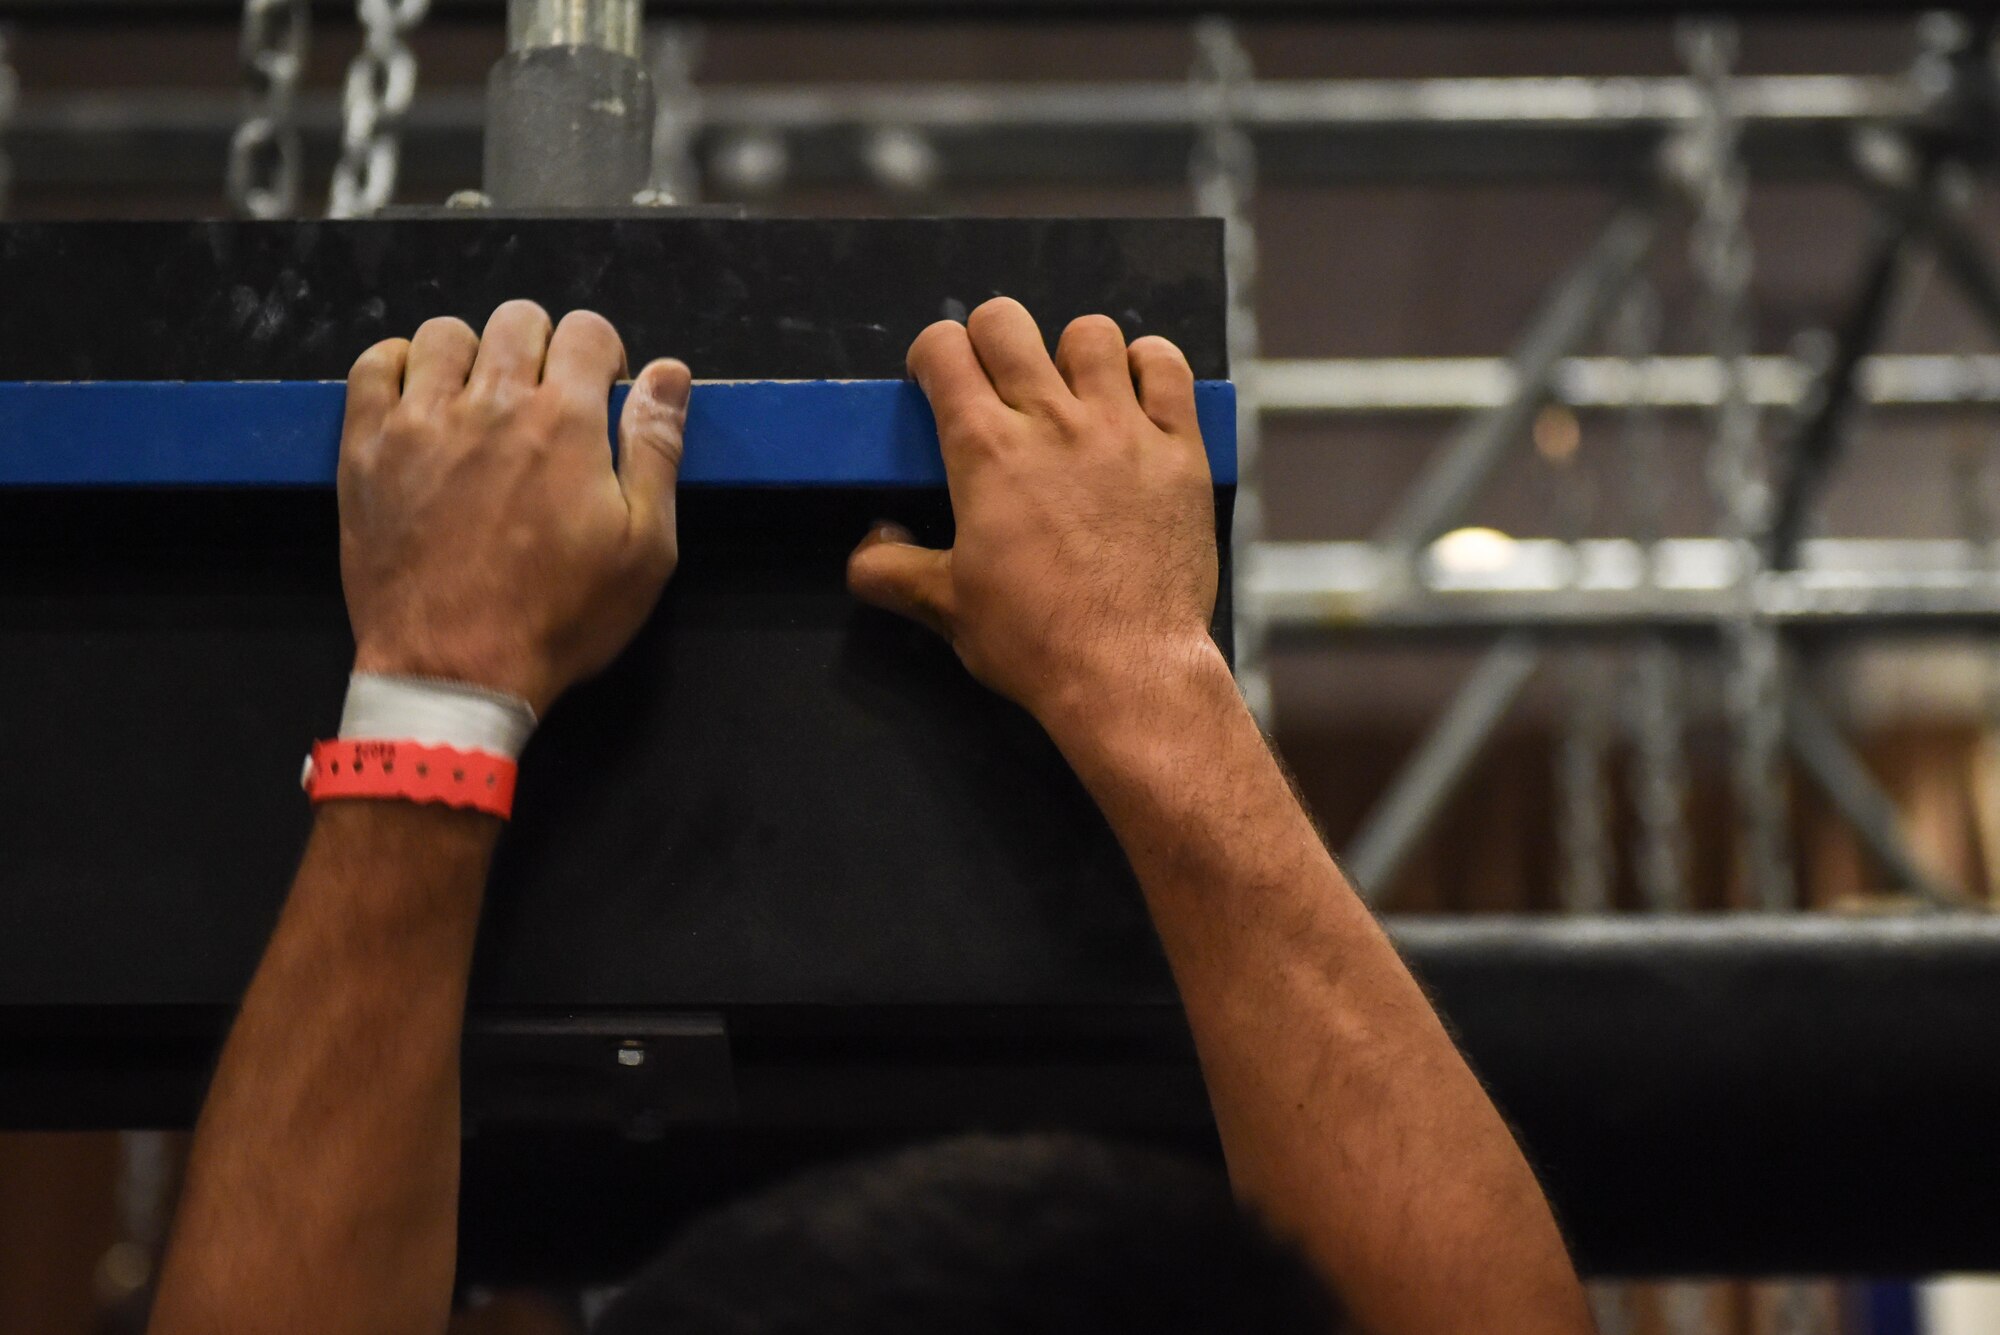 A member of Team Barksdale grips tightly to one of the Alpha Warrior obstacles at Barksdale Air Force Base, La., July 11, 2017. Alpha Warrior left behind one of their obstacle courses for Airmen to use, which is located in the SrA Bell Fitness Center. (U.S. Air Force photo/Airman 1st Class Stuart Bright)